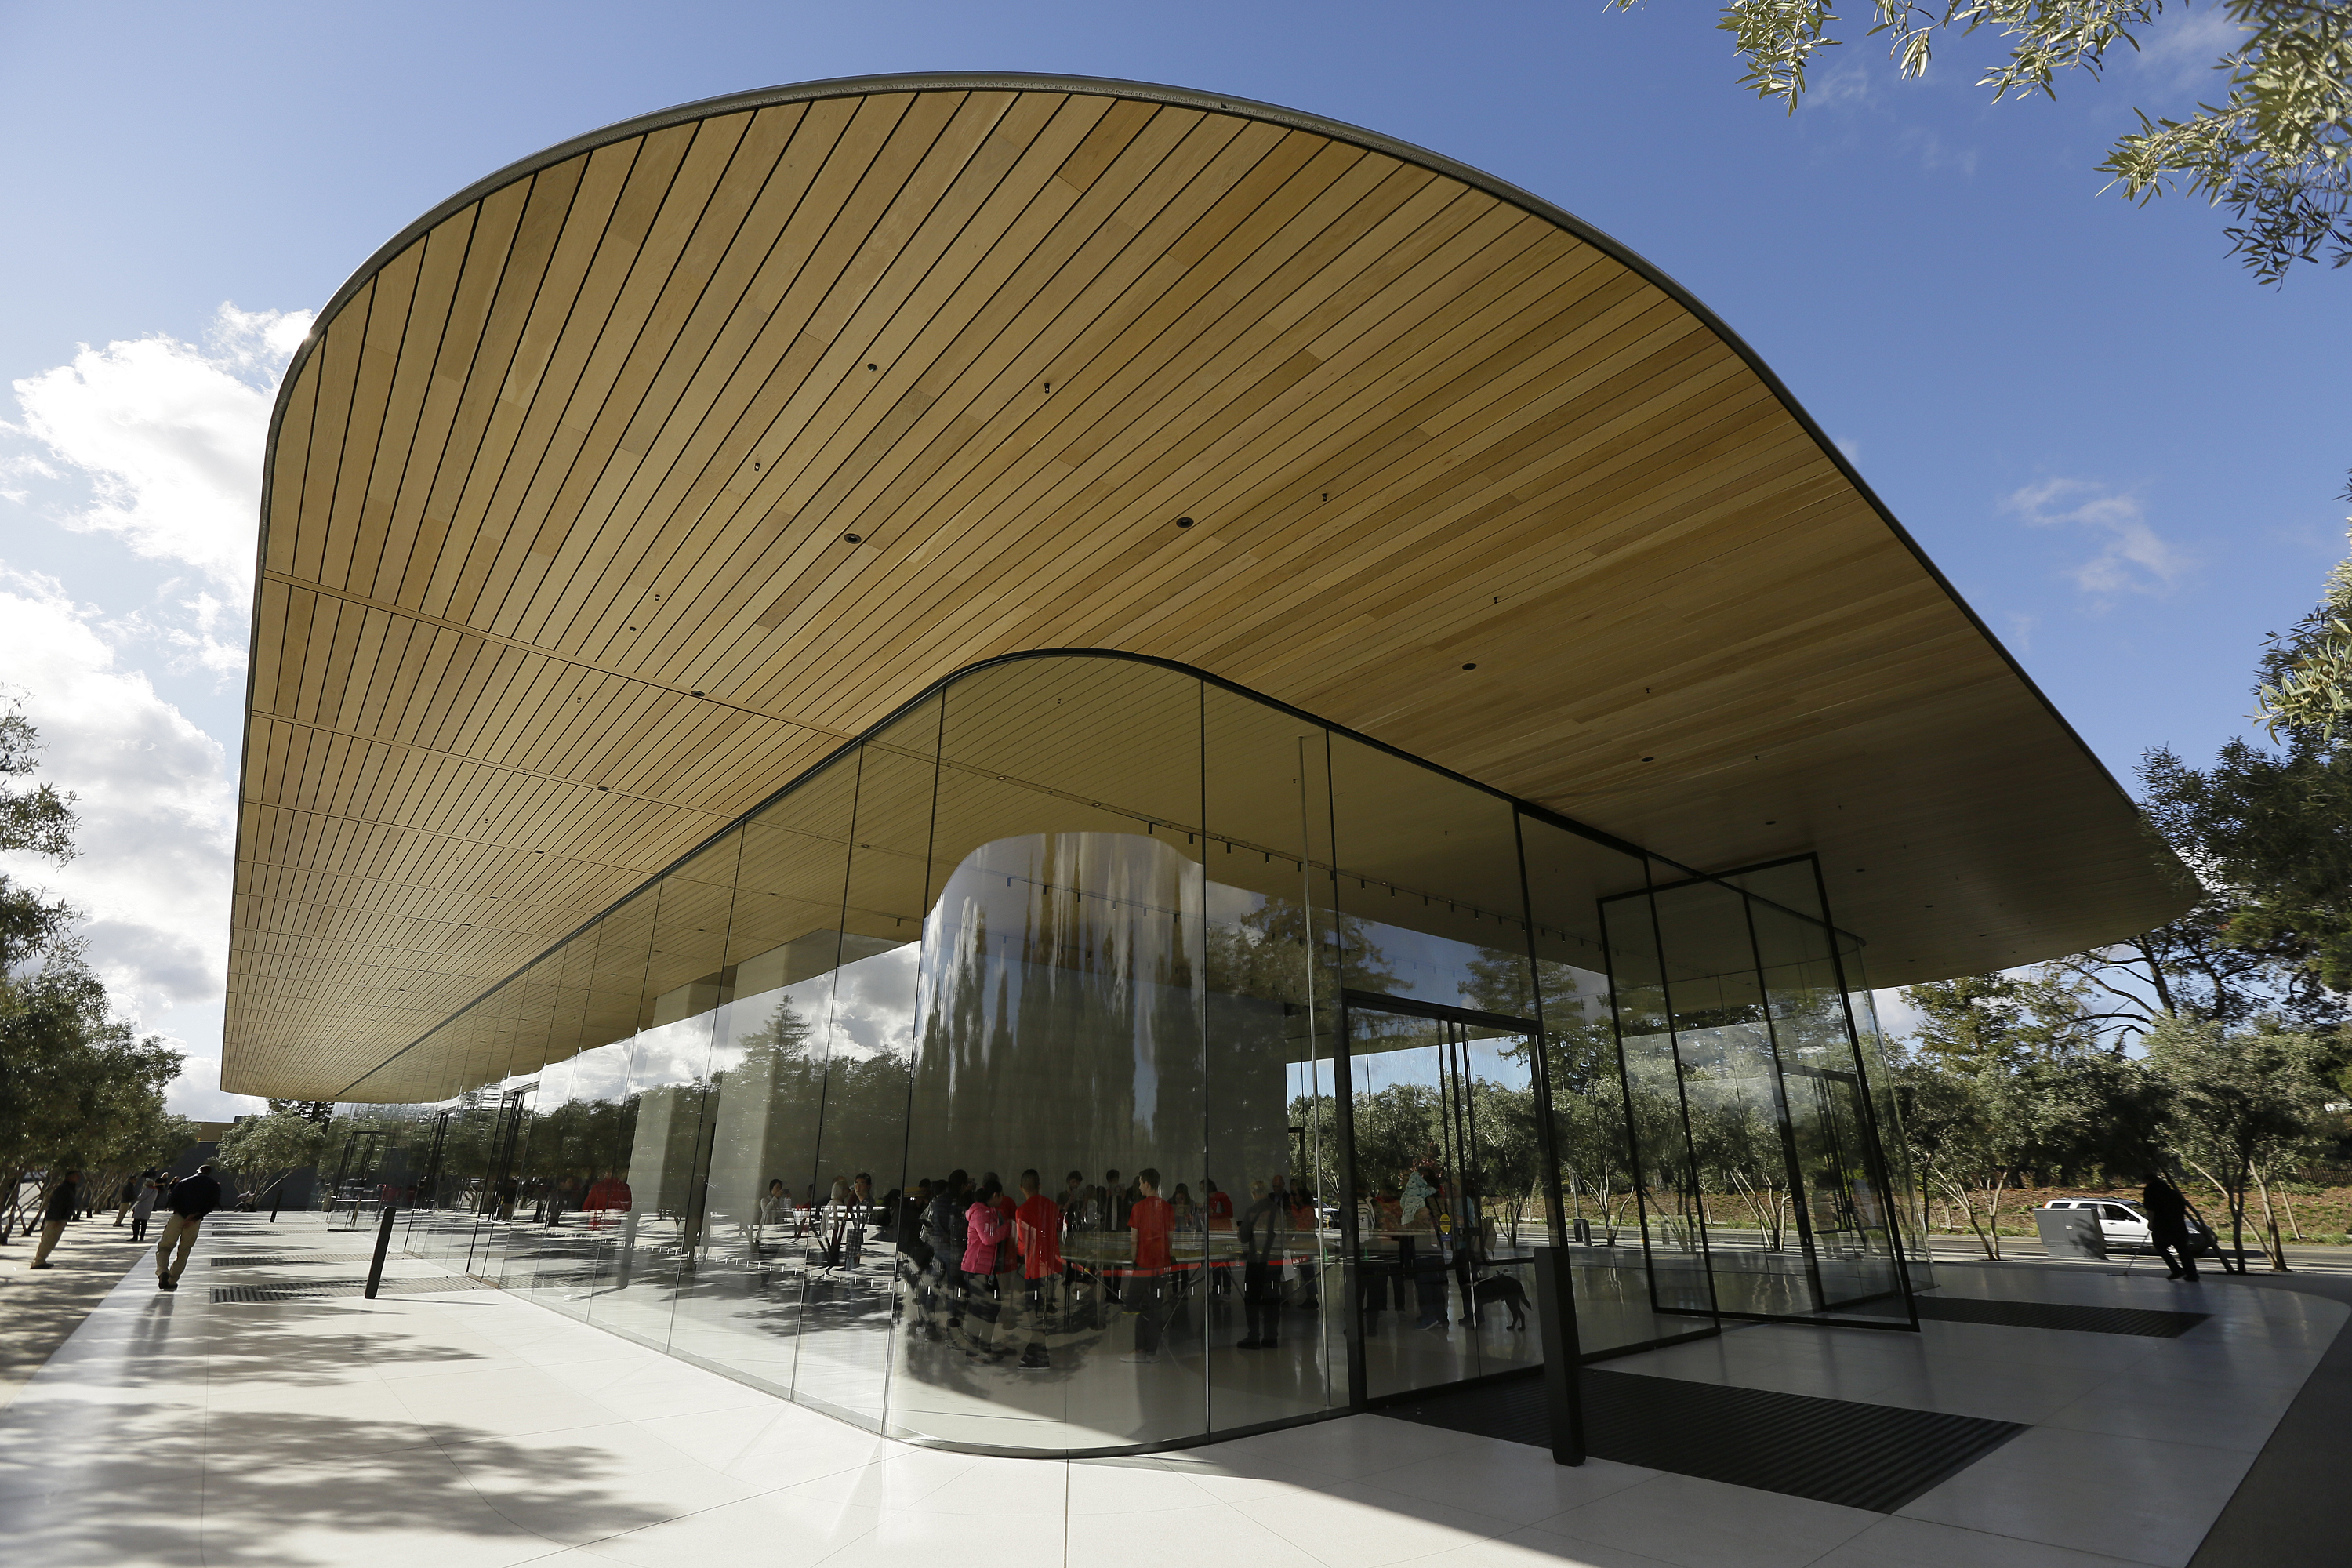 Shown is an exterior view of the Apple Park Visitor Center during its grand opening Friday, Nov. 17, 2017, in Cupertino, Calif. (AP Photo/Eric Risberg)